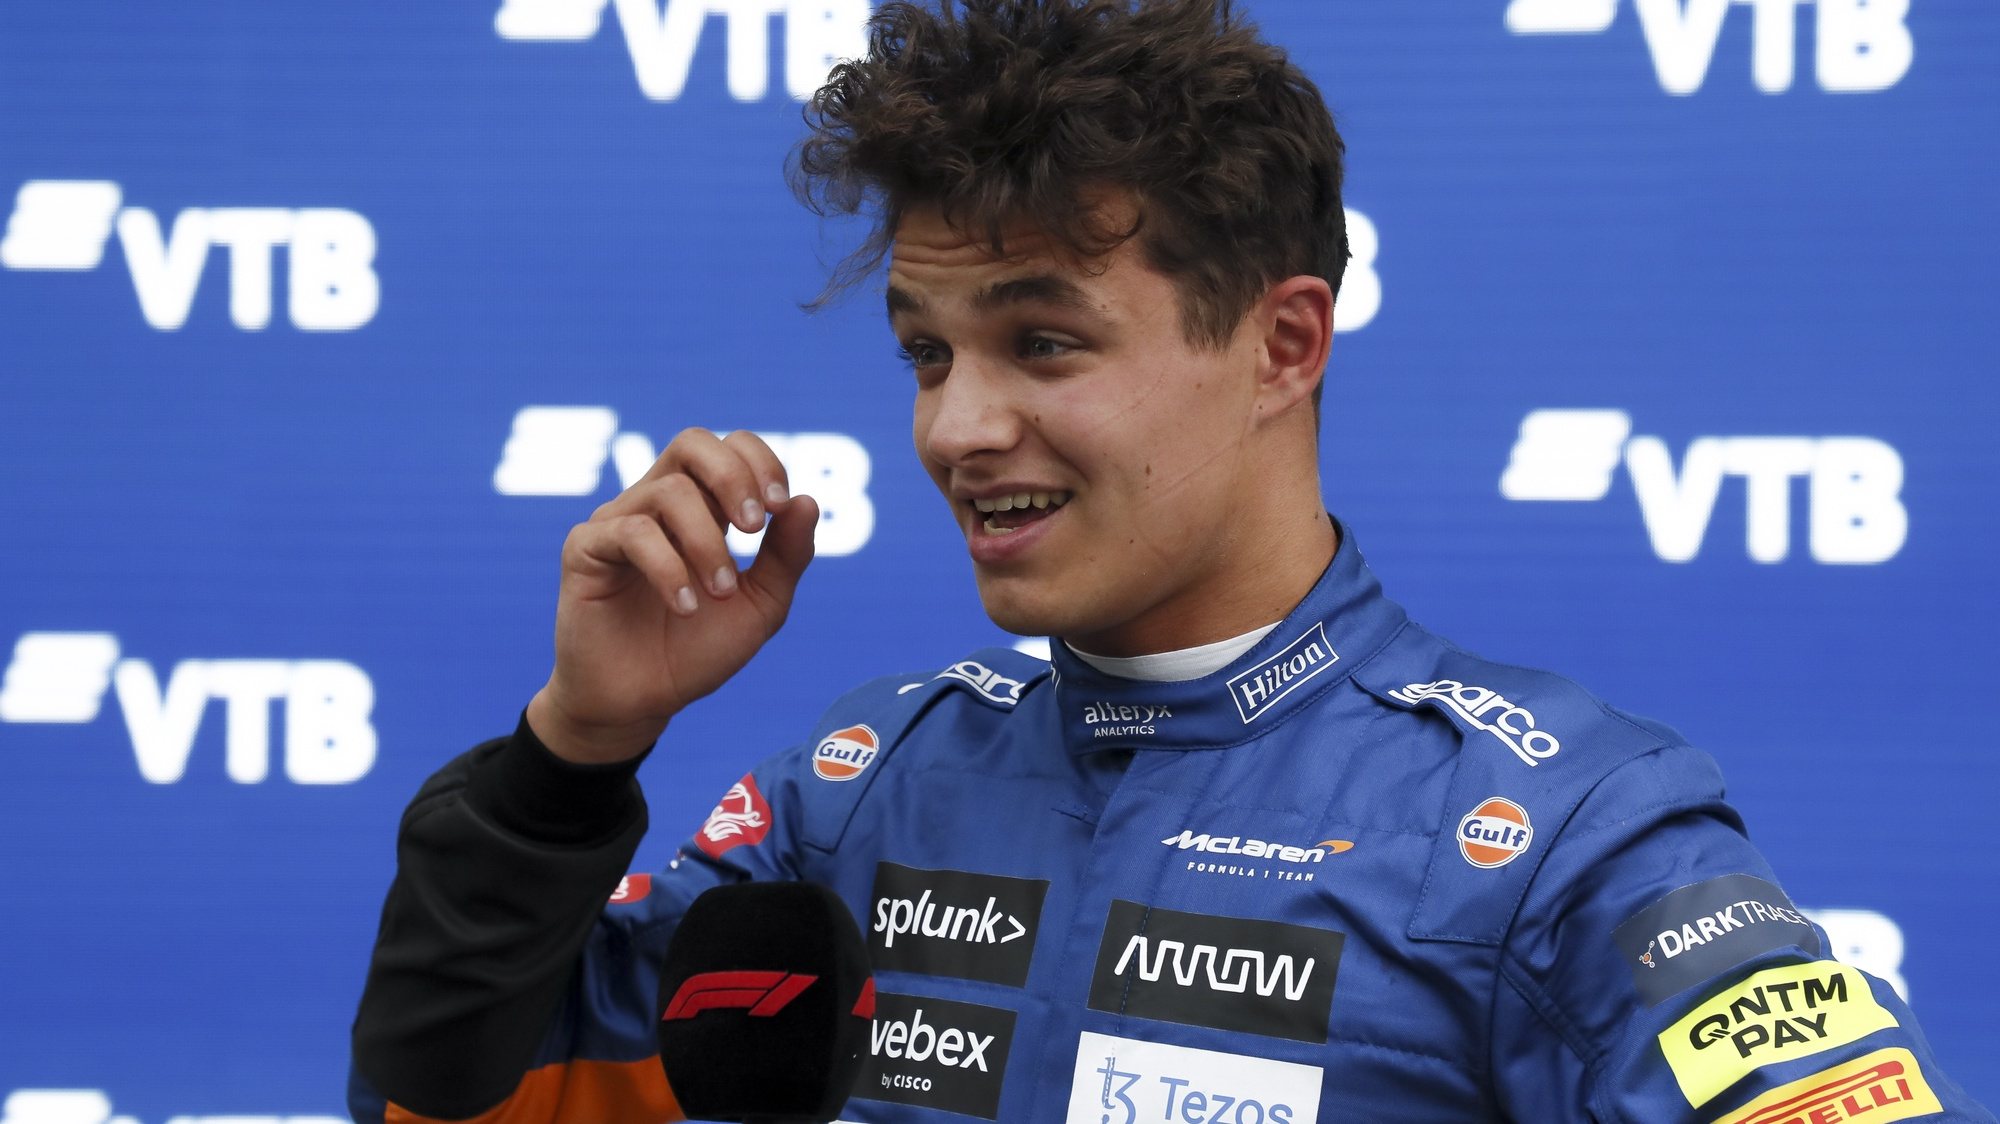 epa09487538 British Formula One driver Lando Norris of the McLaren F1 Team reacts after taking the pole position in the qualifying session of the 2021 Formula One Grand Prix of Russia at the Sochi Autodrom race track in Sochi, Russia, 25 September 2021. The Formula One Grand Prix of Russia will take place on 26 September 2021.  EPA/Yuri Kochetkov / POOL